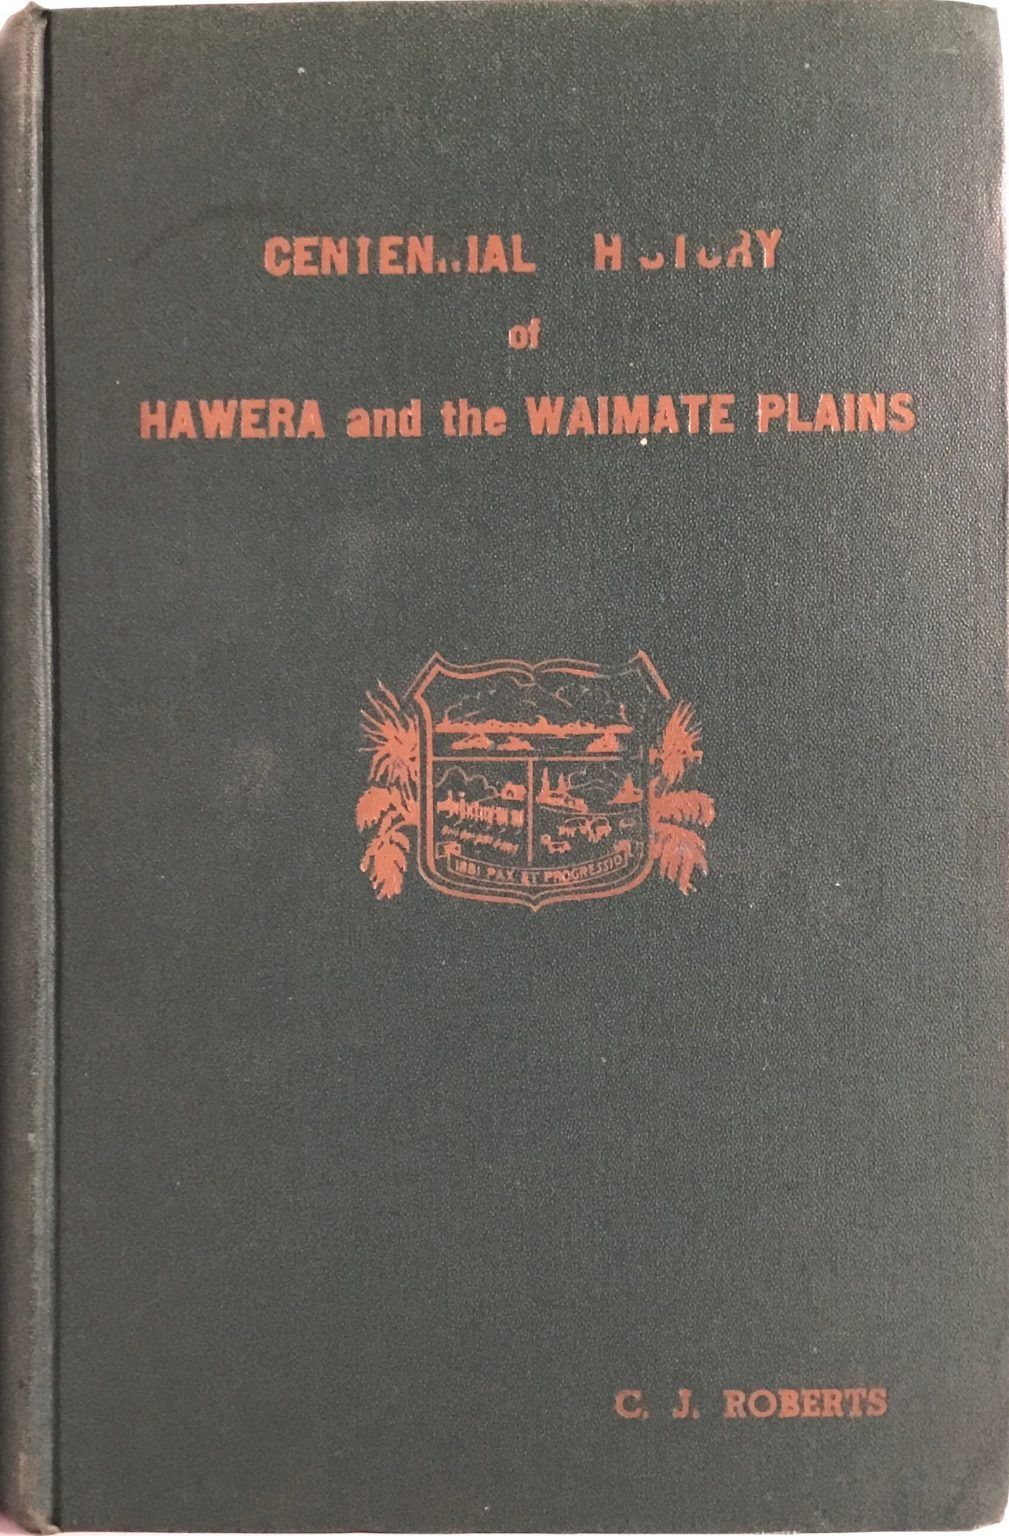 CENTENNIAL HISTORY of HAWERA and the WAIMATE PLAINS by C. J. Roberts